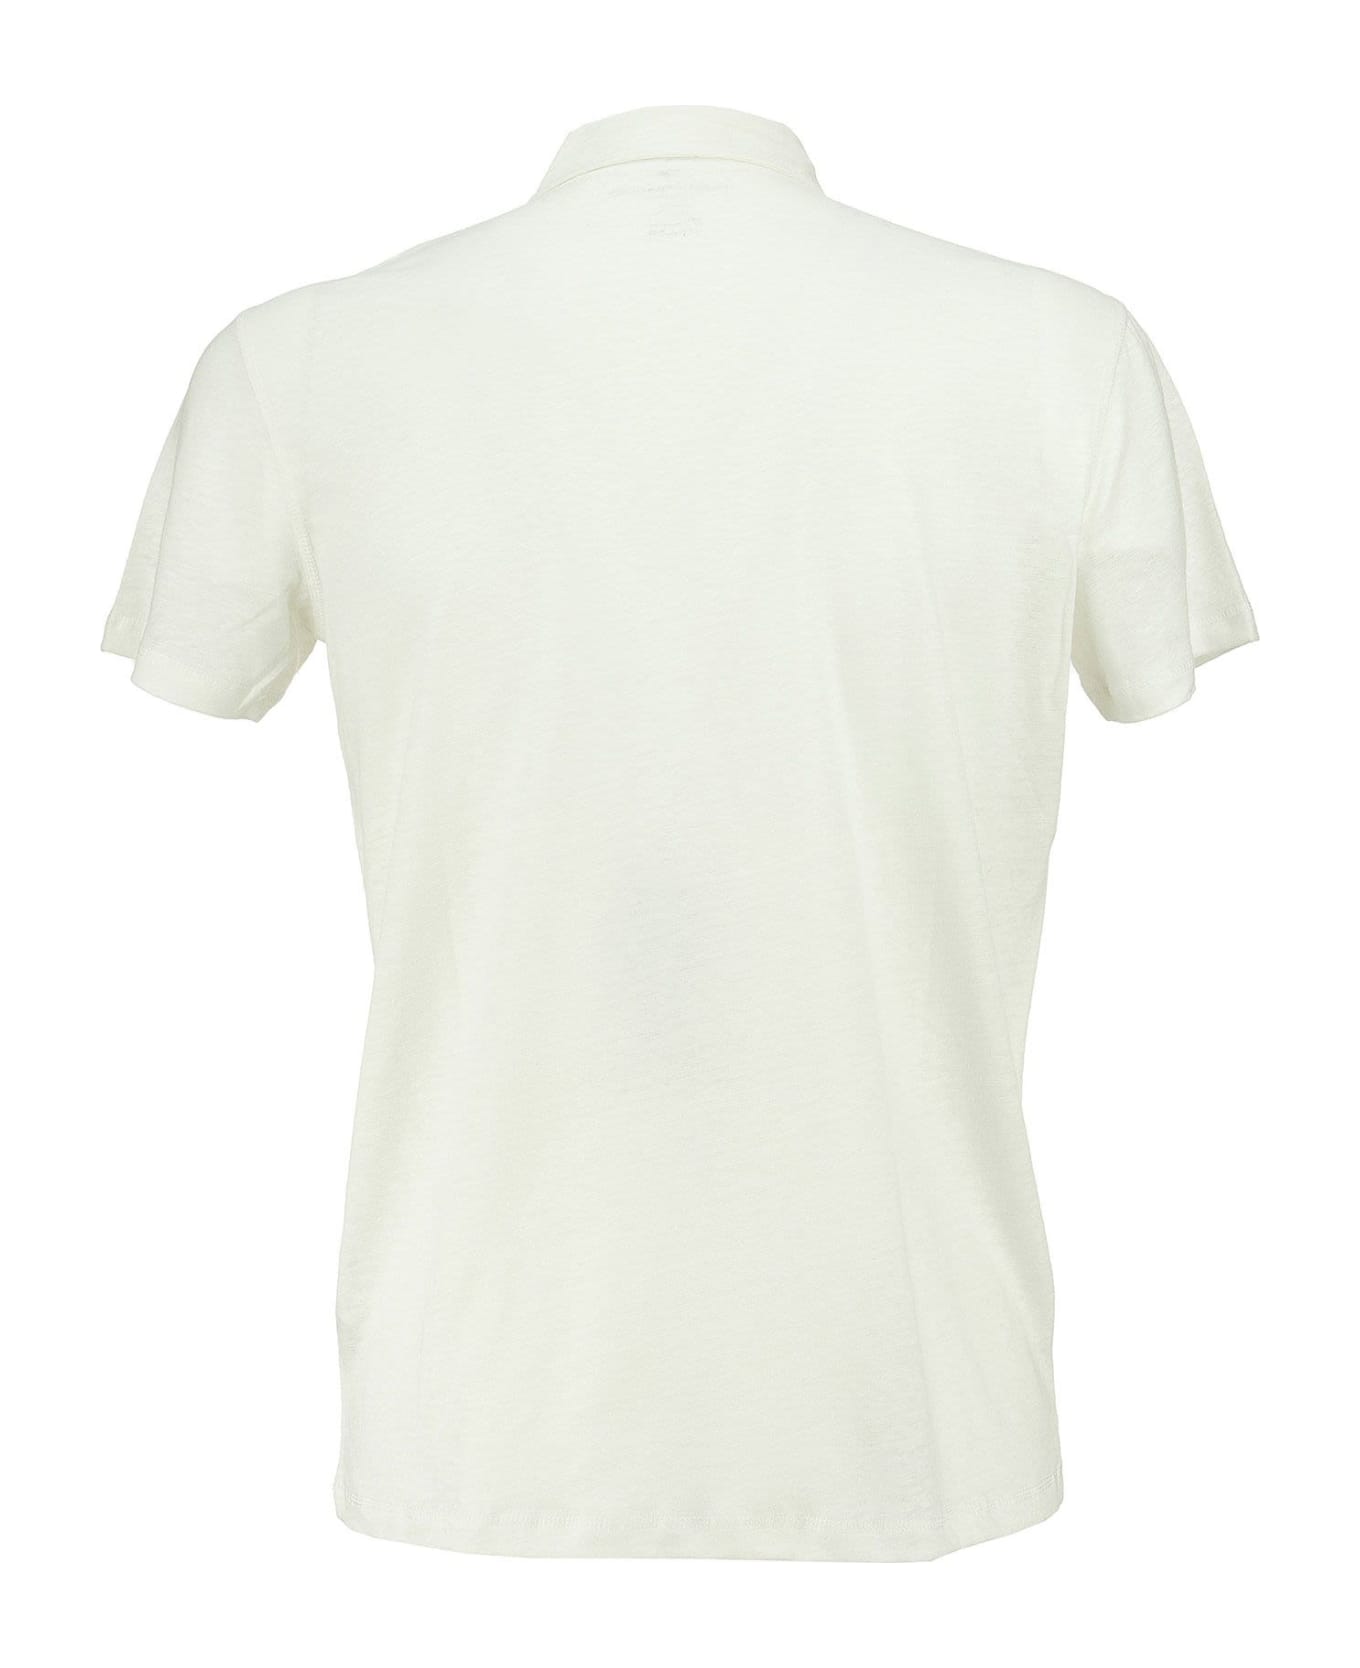 Majestic Filatures mouwen Polo Shirt With Short Sleeves - White